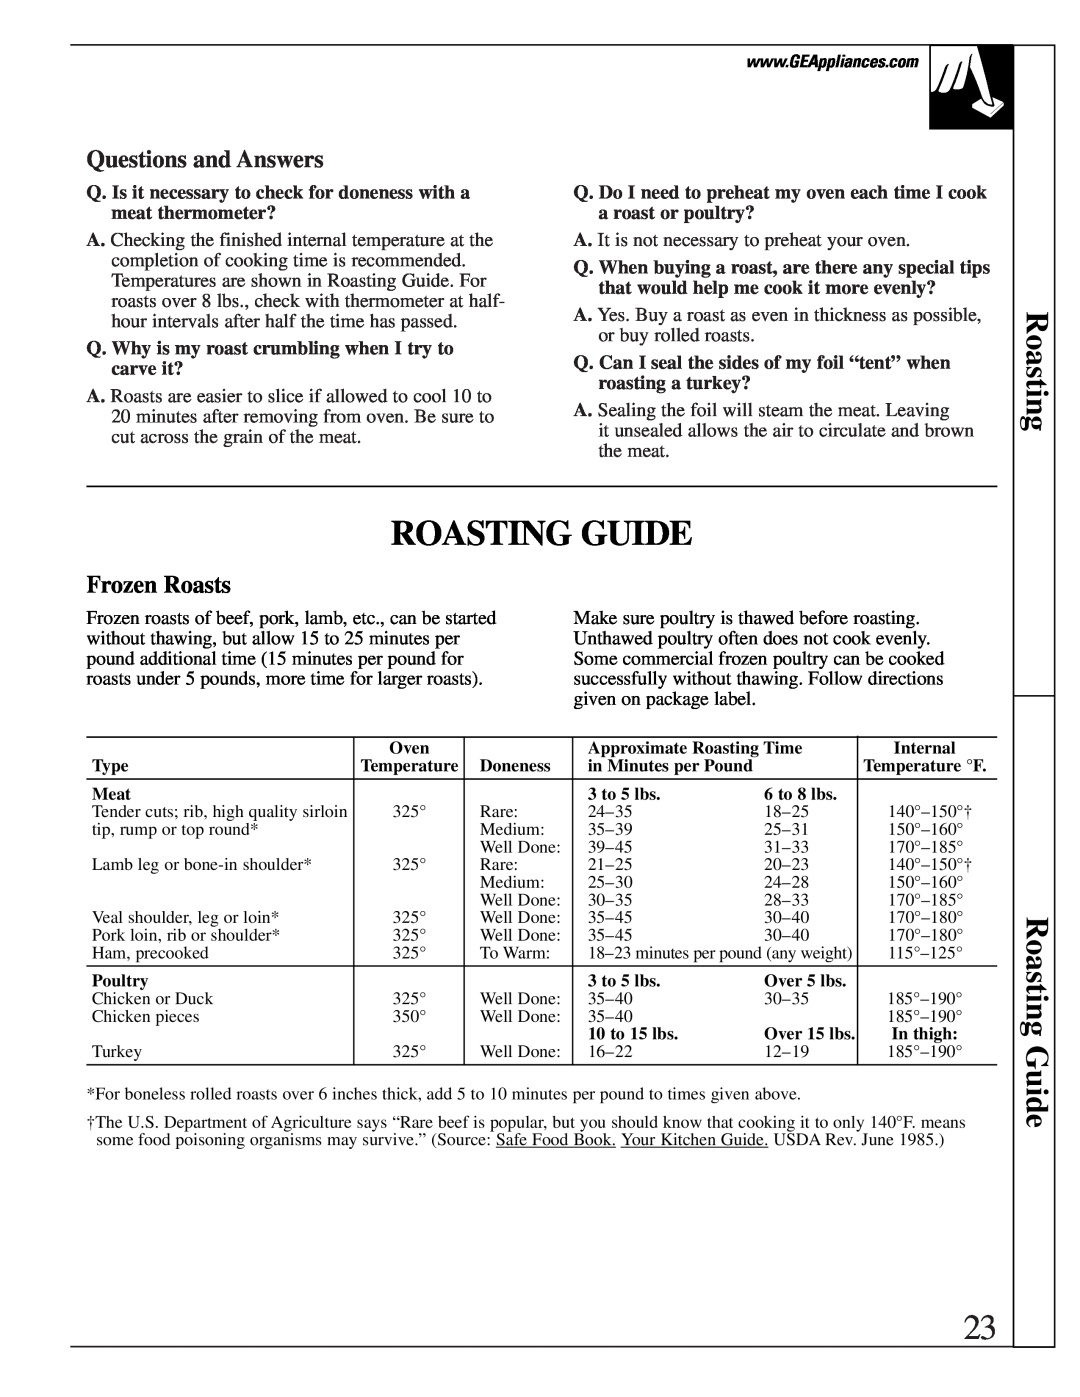 GE JGBP40, EGR3001, JR EGR3000 manual Roasting Guide, Frozen Roasts, Questions and Answers 